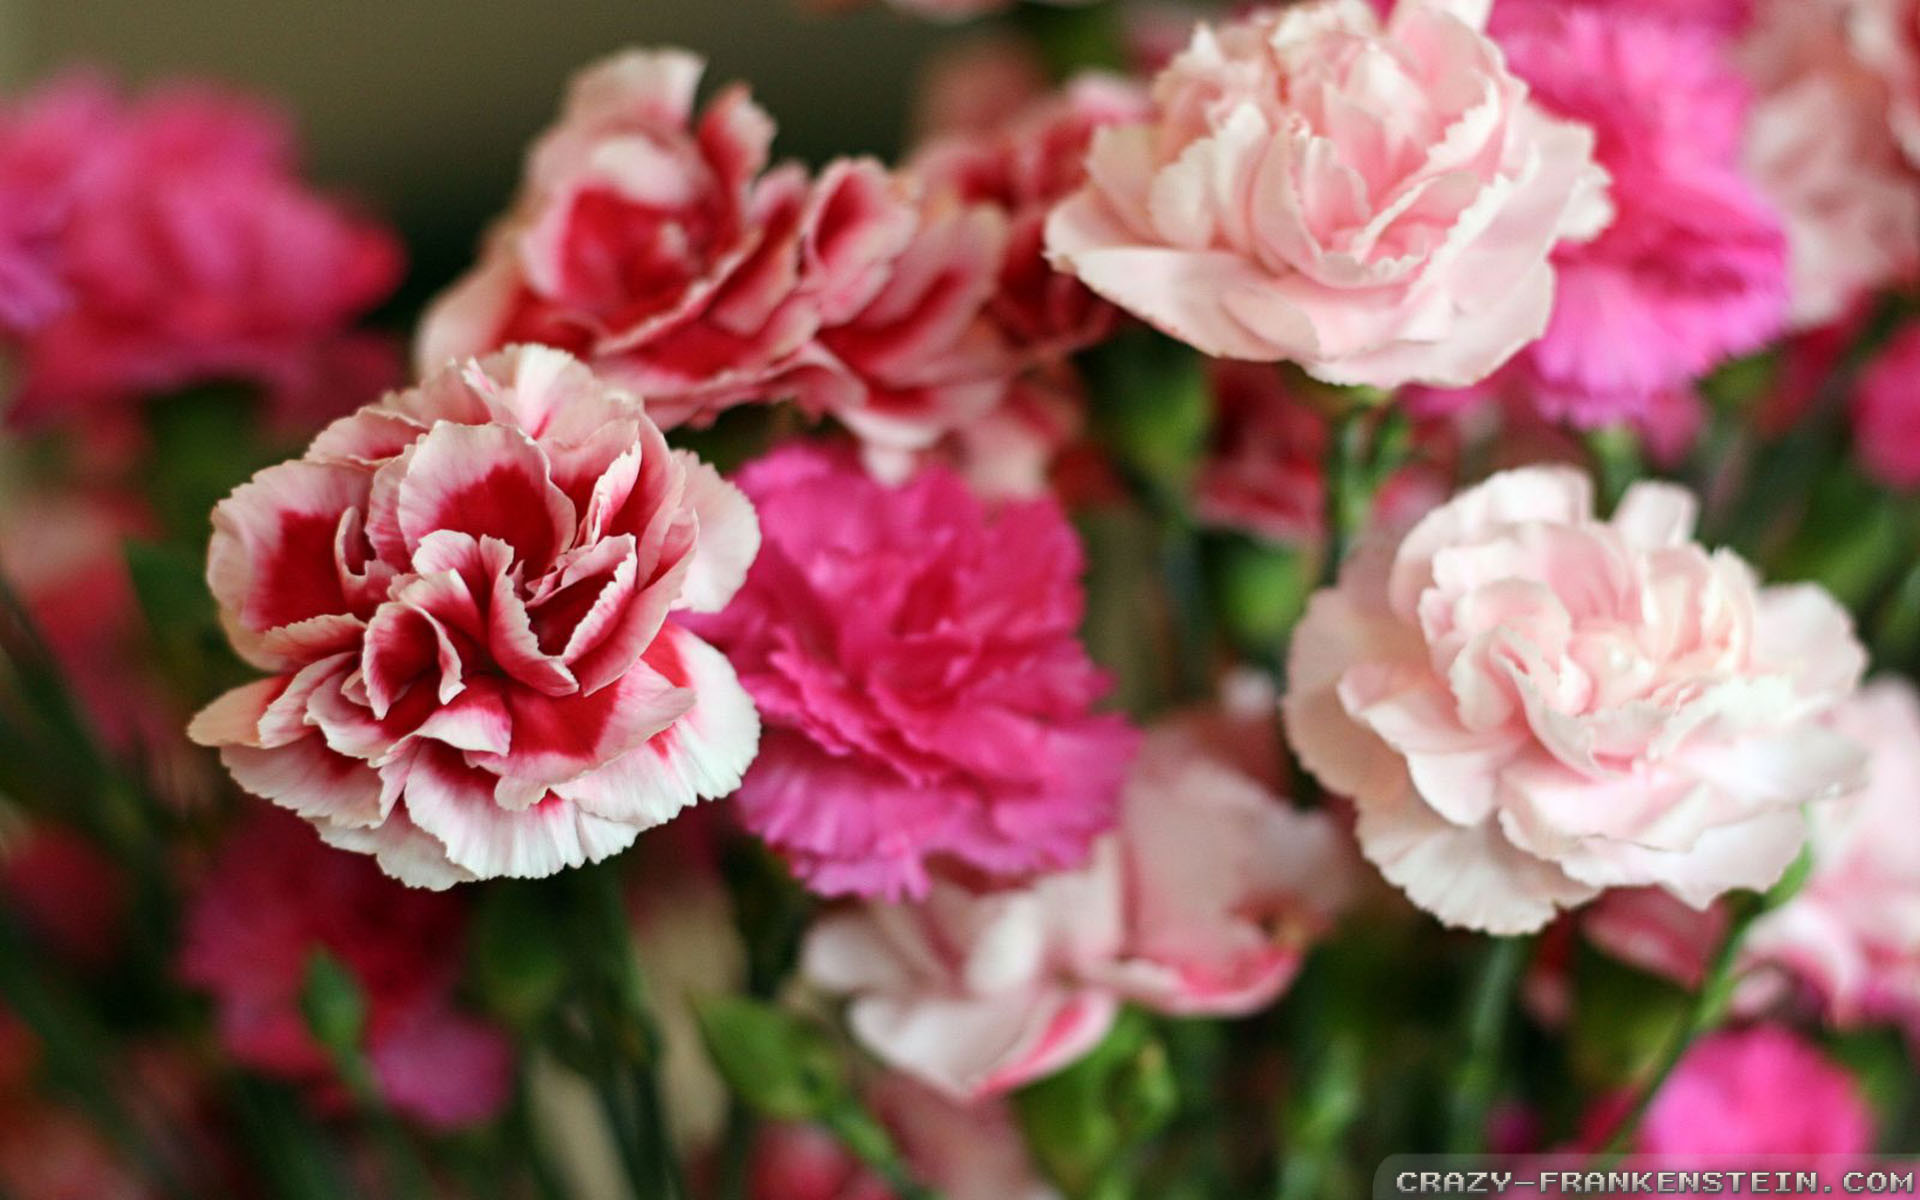 1920x1200 Wallpaper: Colorful carnation wallpapers. Resolution: 1024x768 | 1280x1024  | 1600x1200. Widescreen Res: 1440x900 | 1680x1050 | 